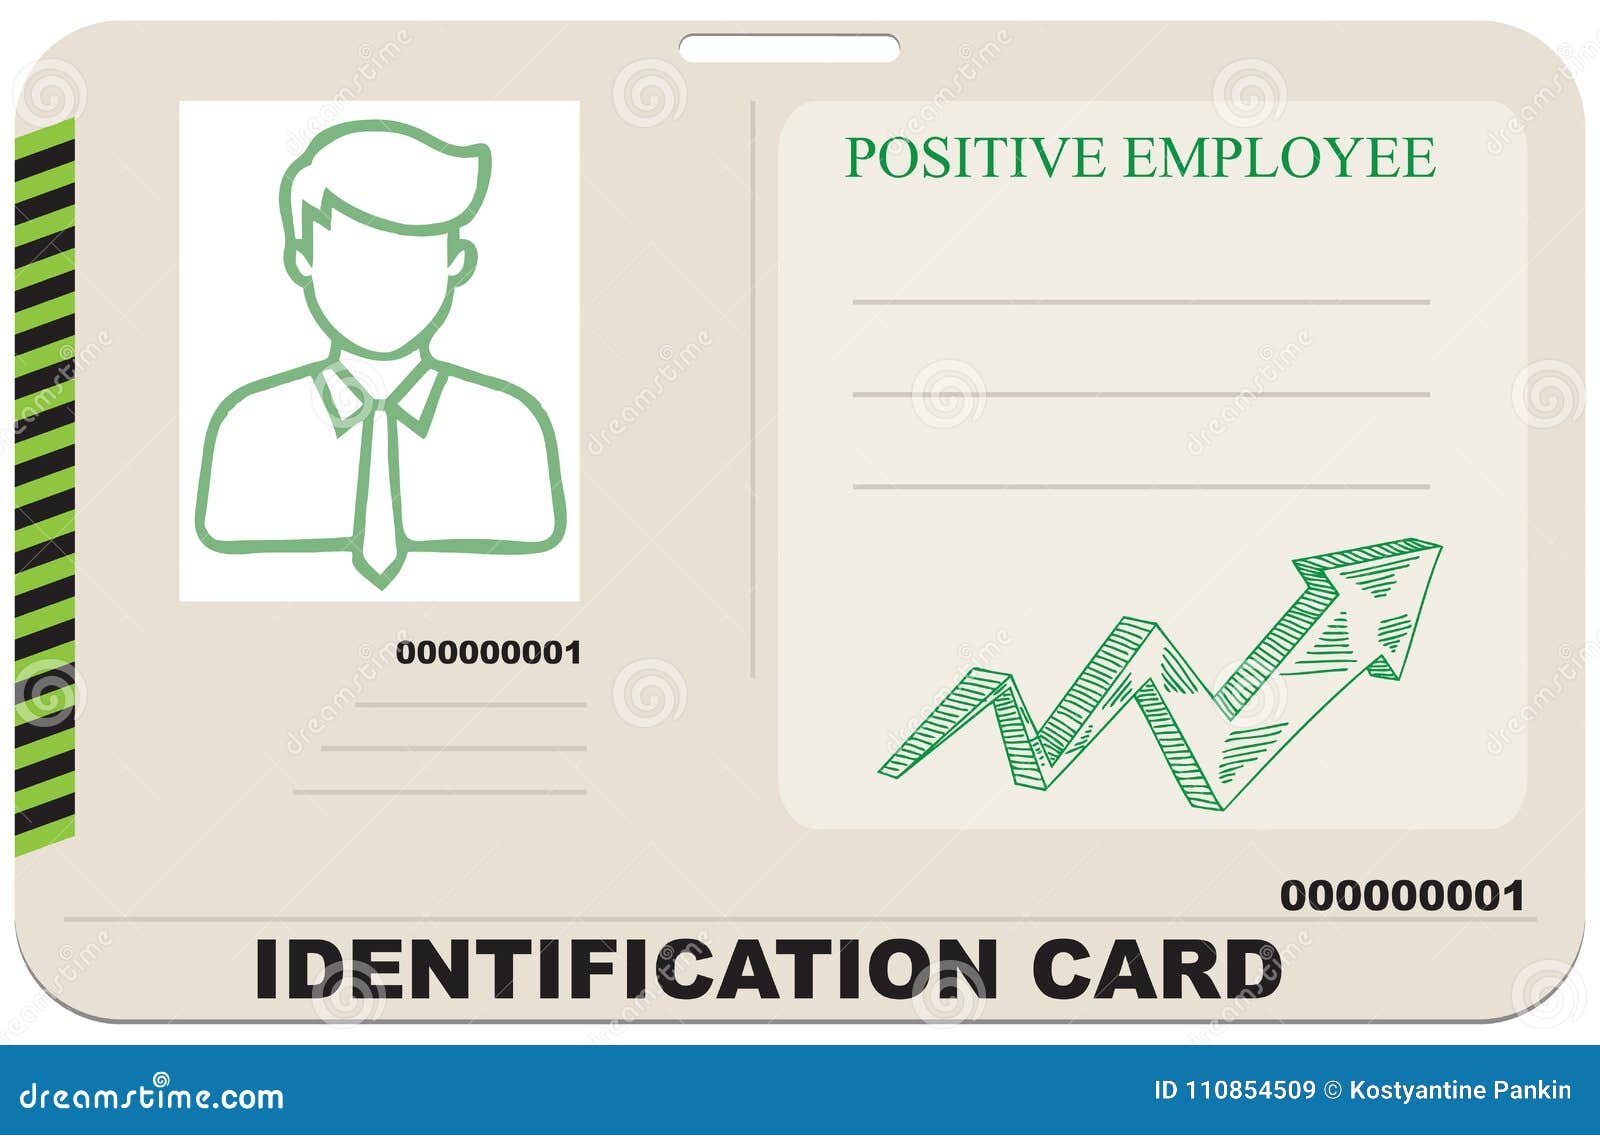 Identification Card For Positive Employee Stock Vector Throughout Mi6 Id Card Template